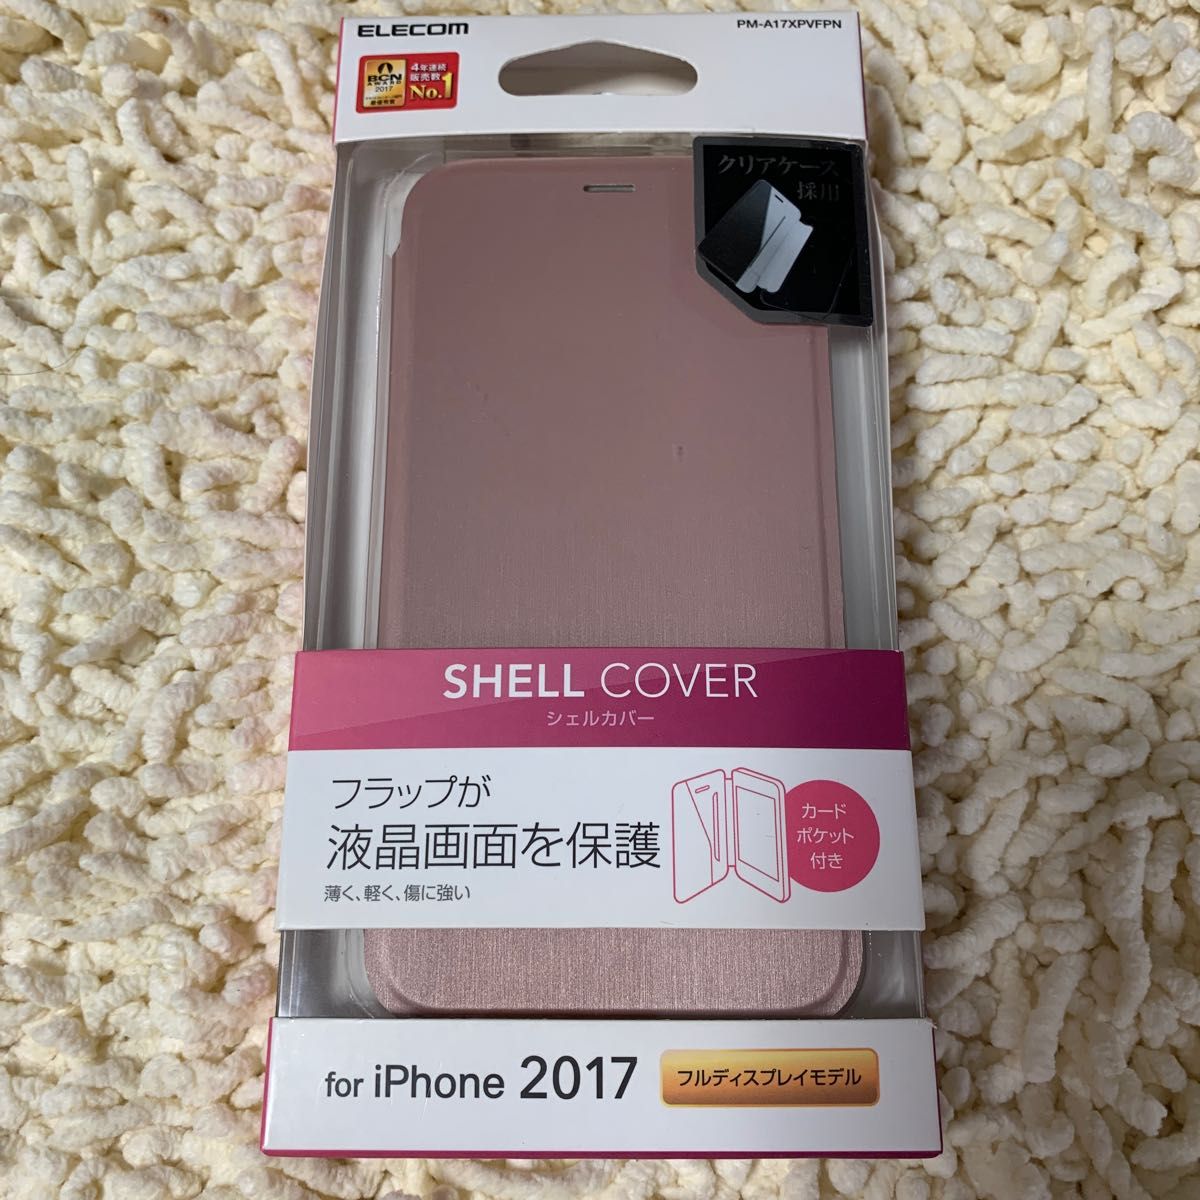 iPhone X用 シェルカバー フラップ ピンク PM-A17XPVFPN